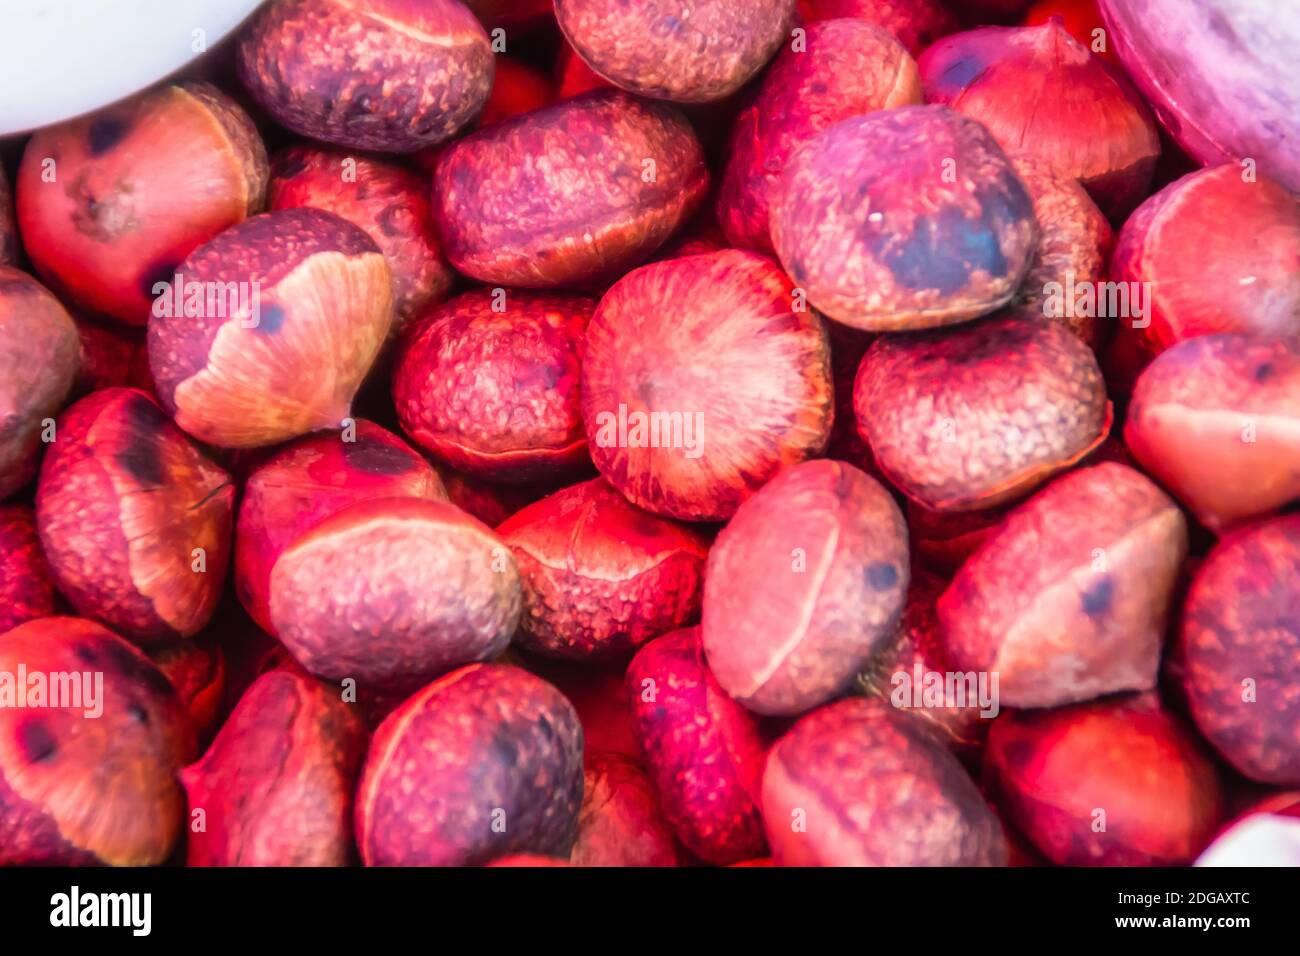 Roasted Thai Castanea nuts for sale in the local market. Castanopsis inermis is also known as chinquapin or chinkapin, is a genus of evergreen trees b Stock Photo